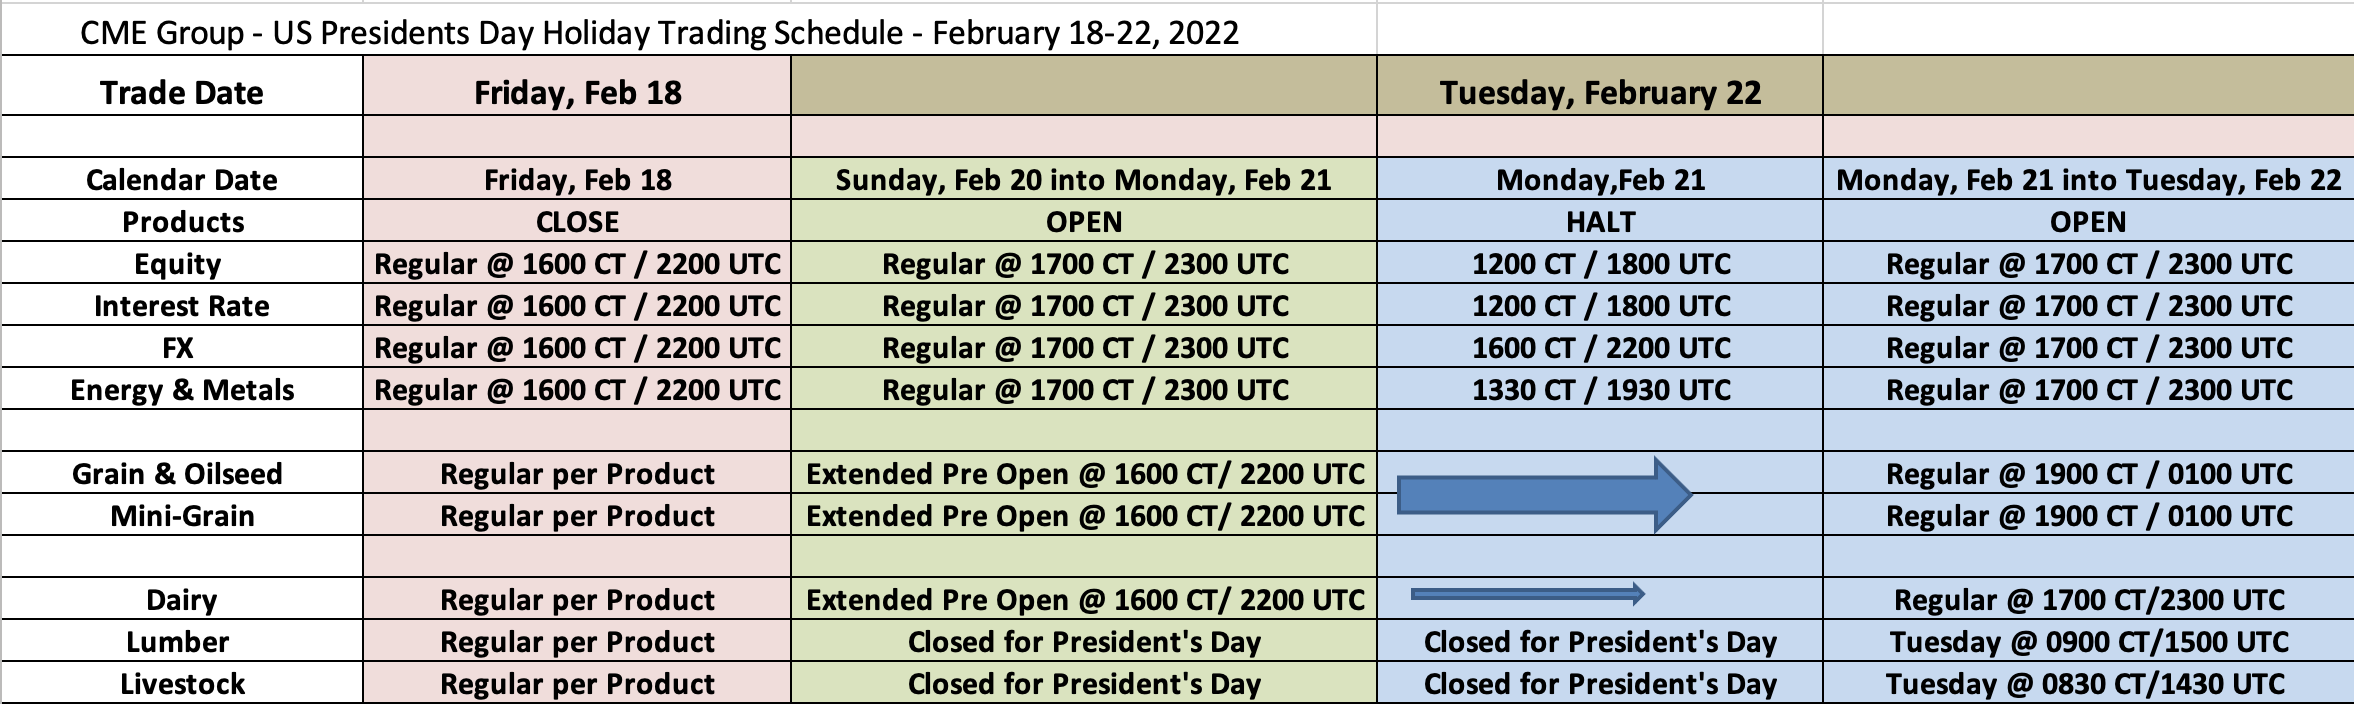 US Presidents Day Holiday Trading Schedule - 2022